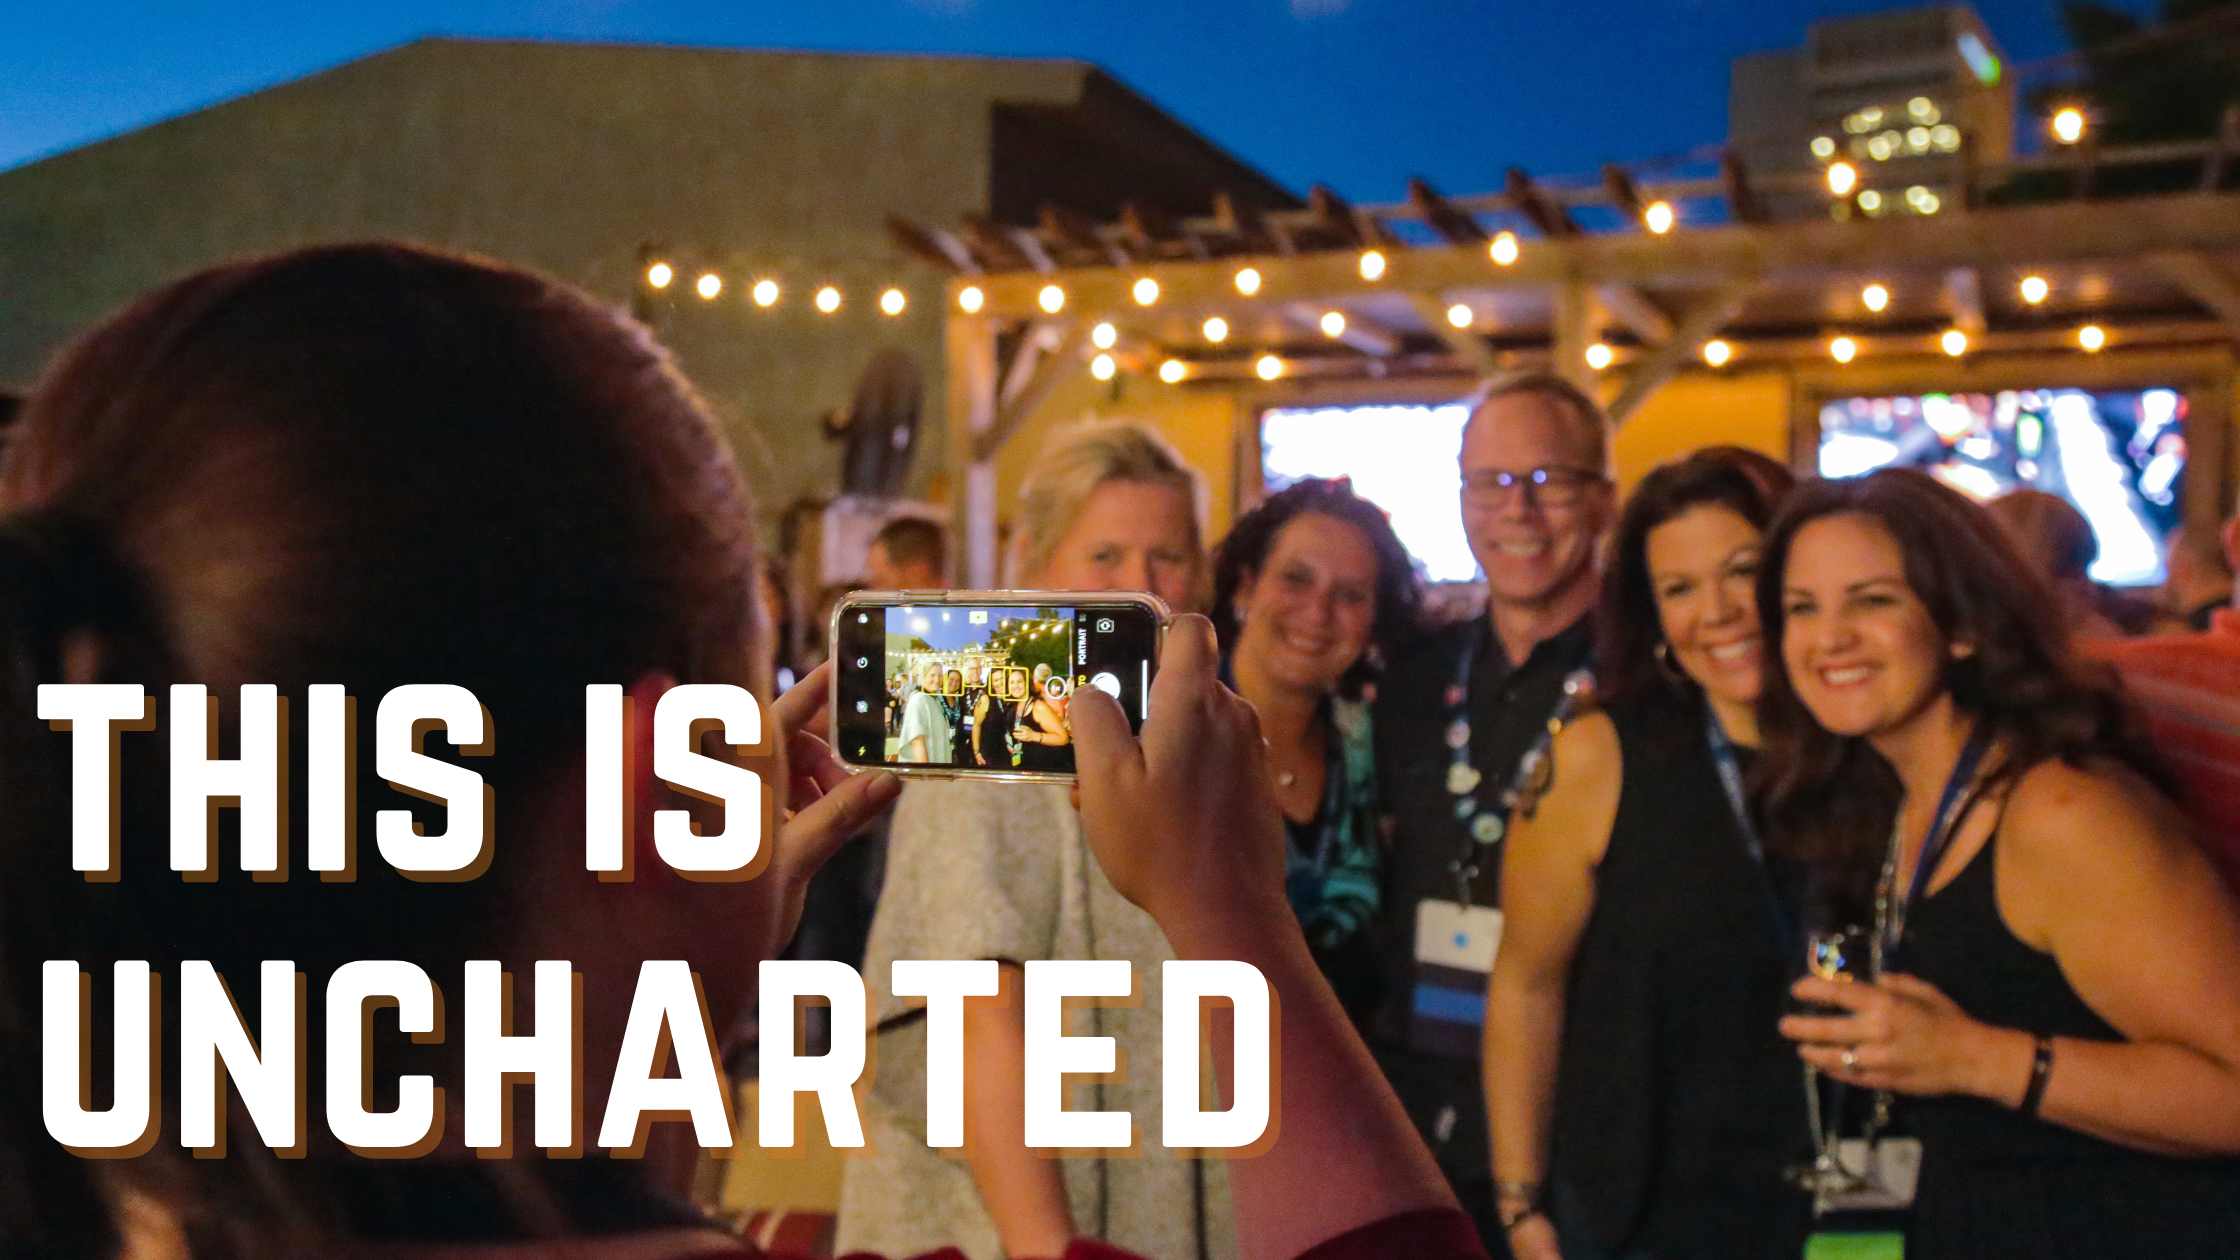 This is Uncharted. Photo of Uncharted conference attendees smiling for a photo to be taken.